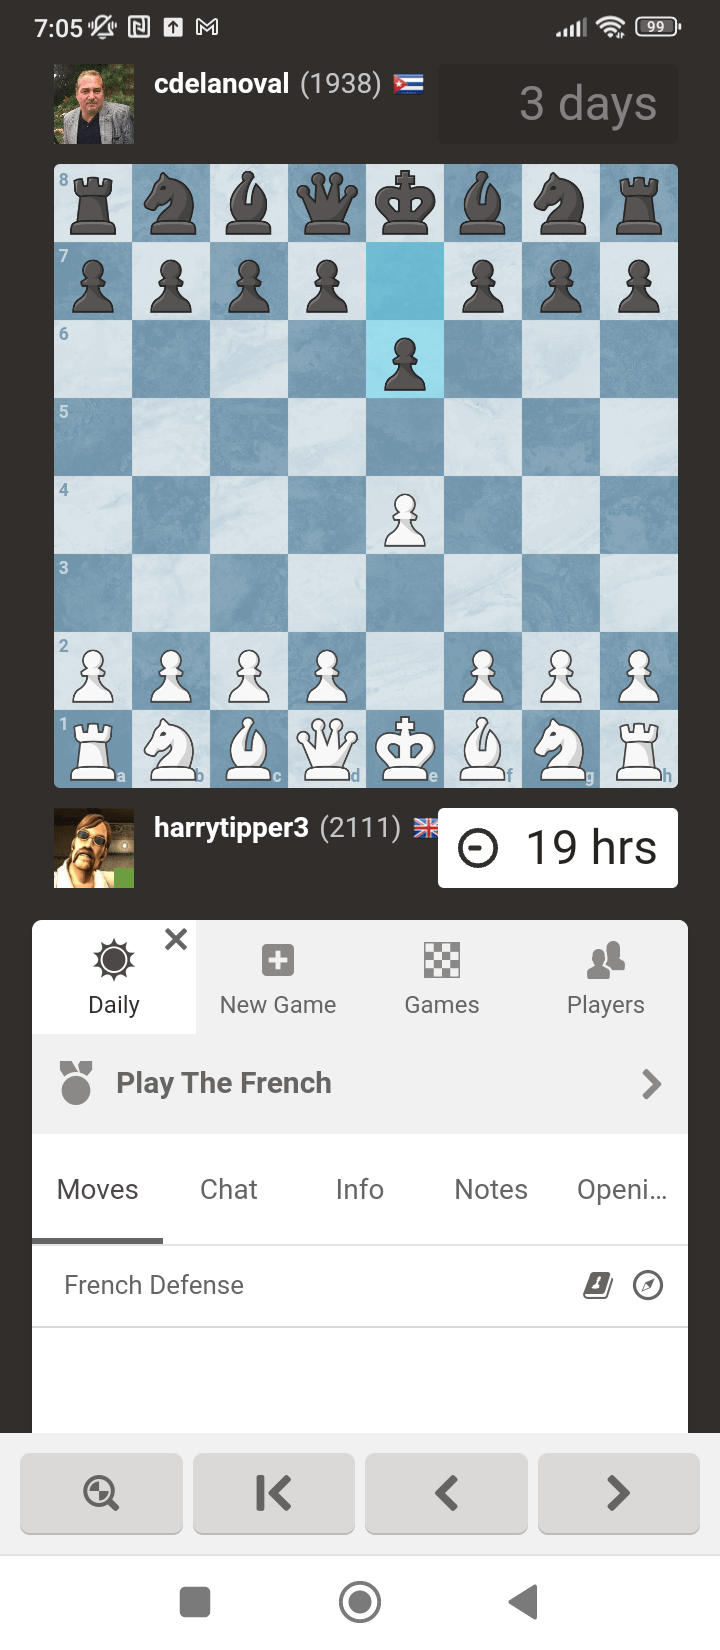 Is he really dead or just a foe?????? - Chess Forums 